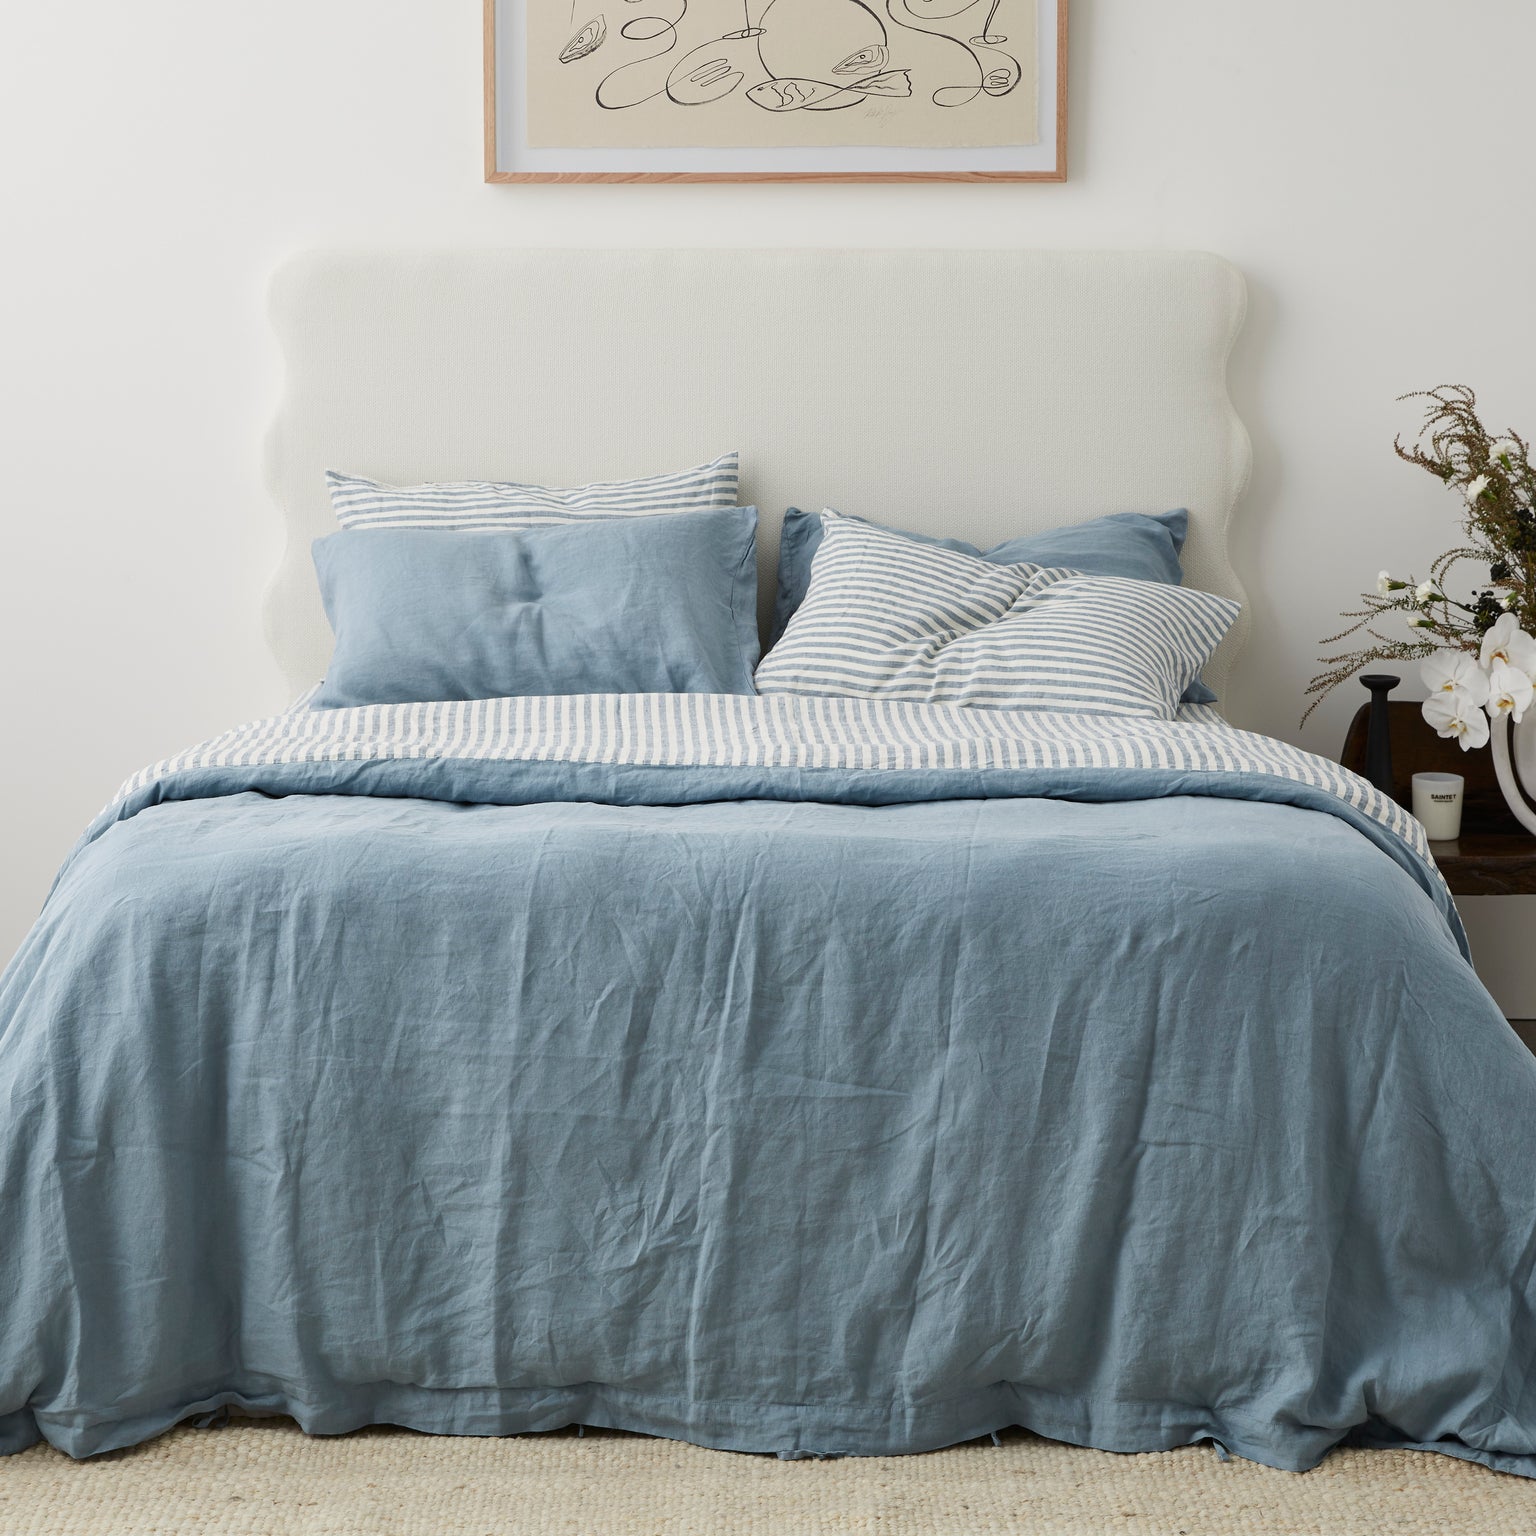 Marine Blue French Flax Linen Sheets